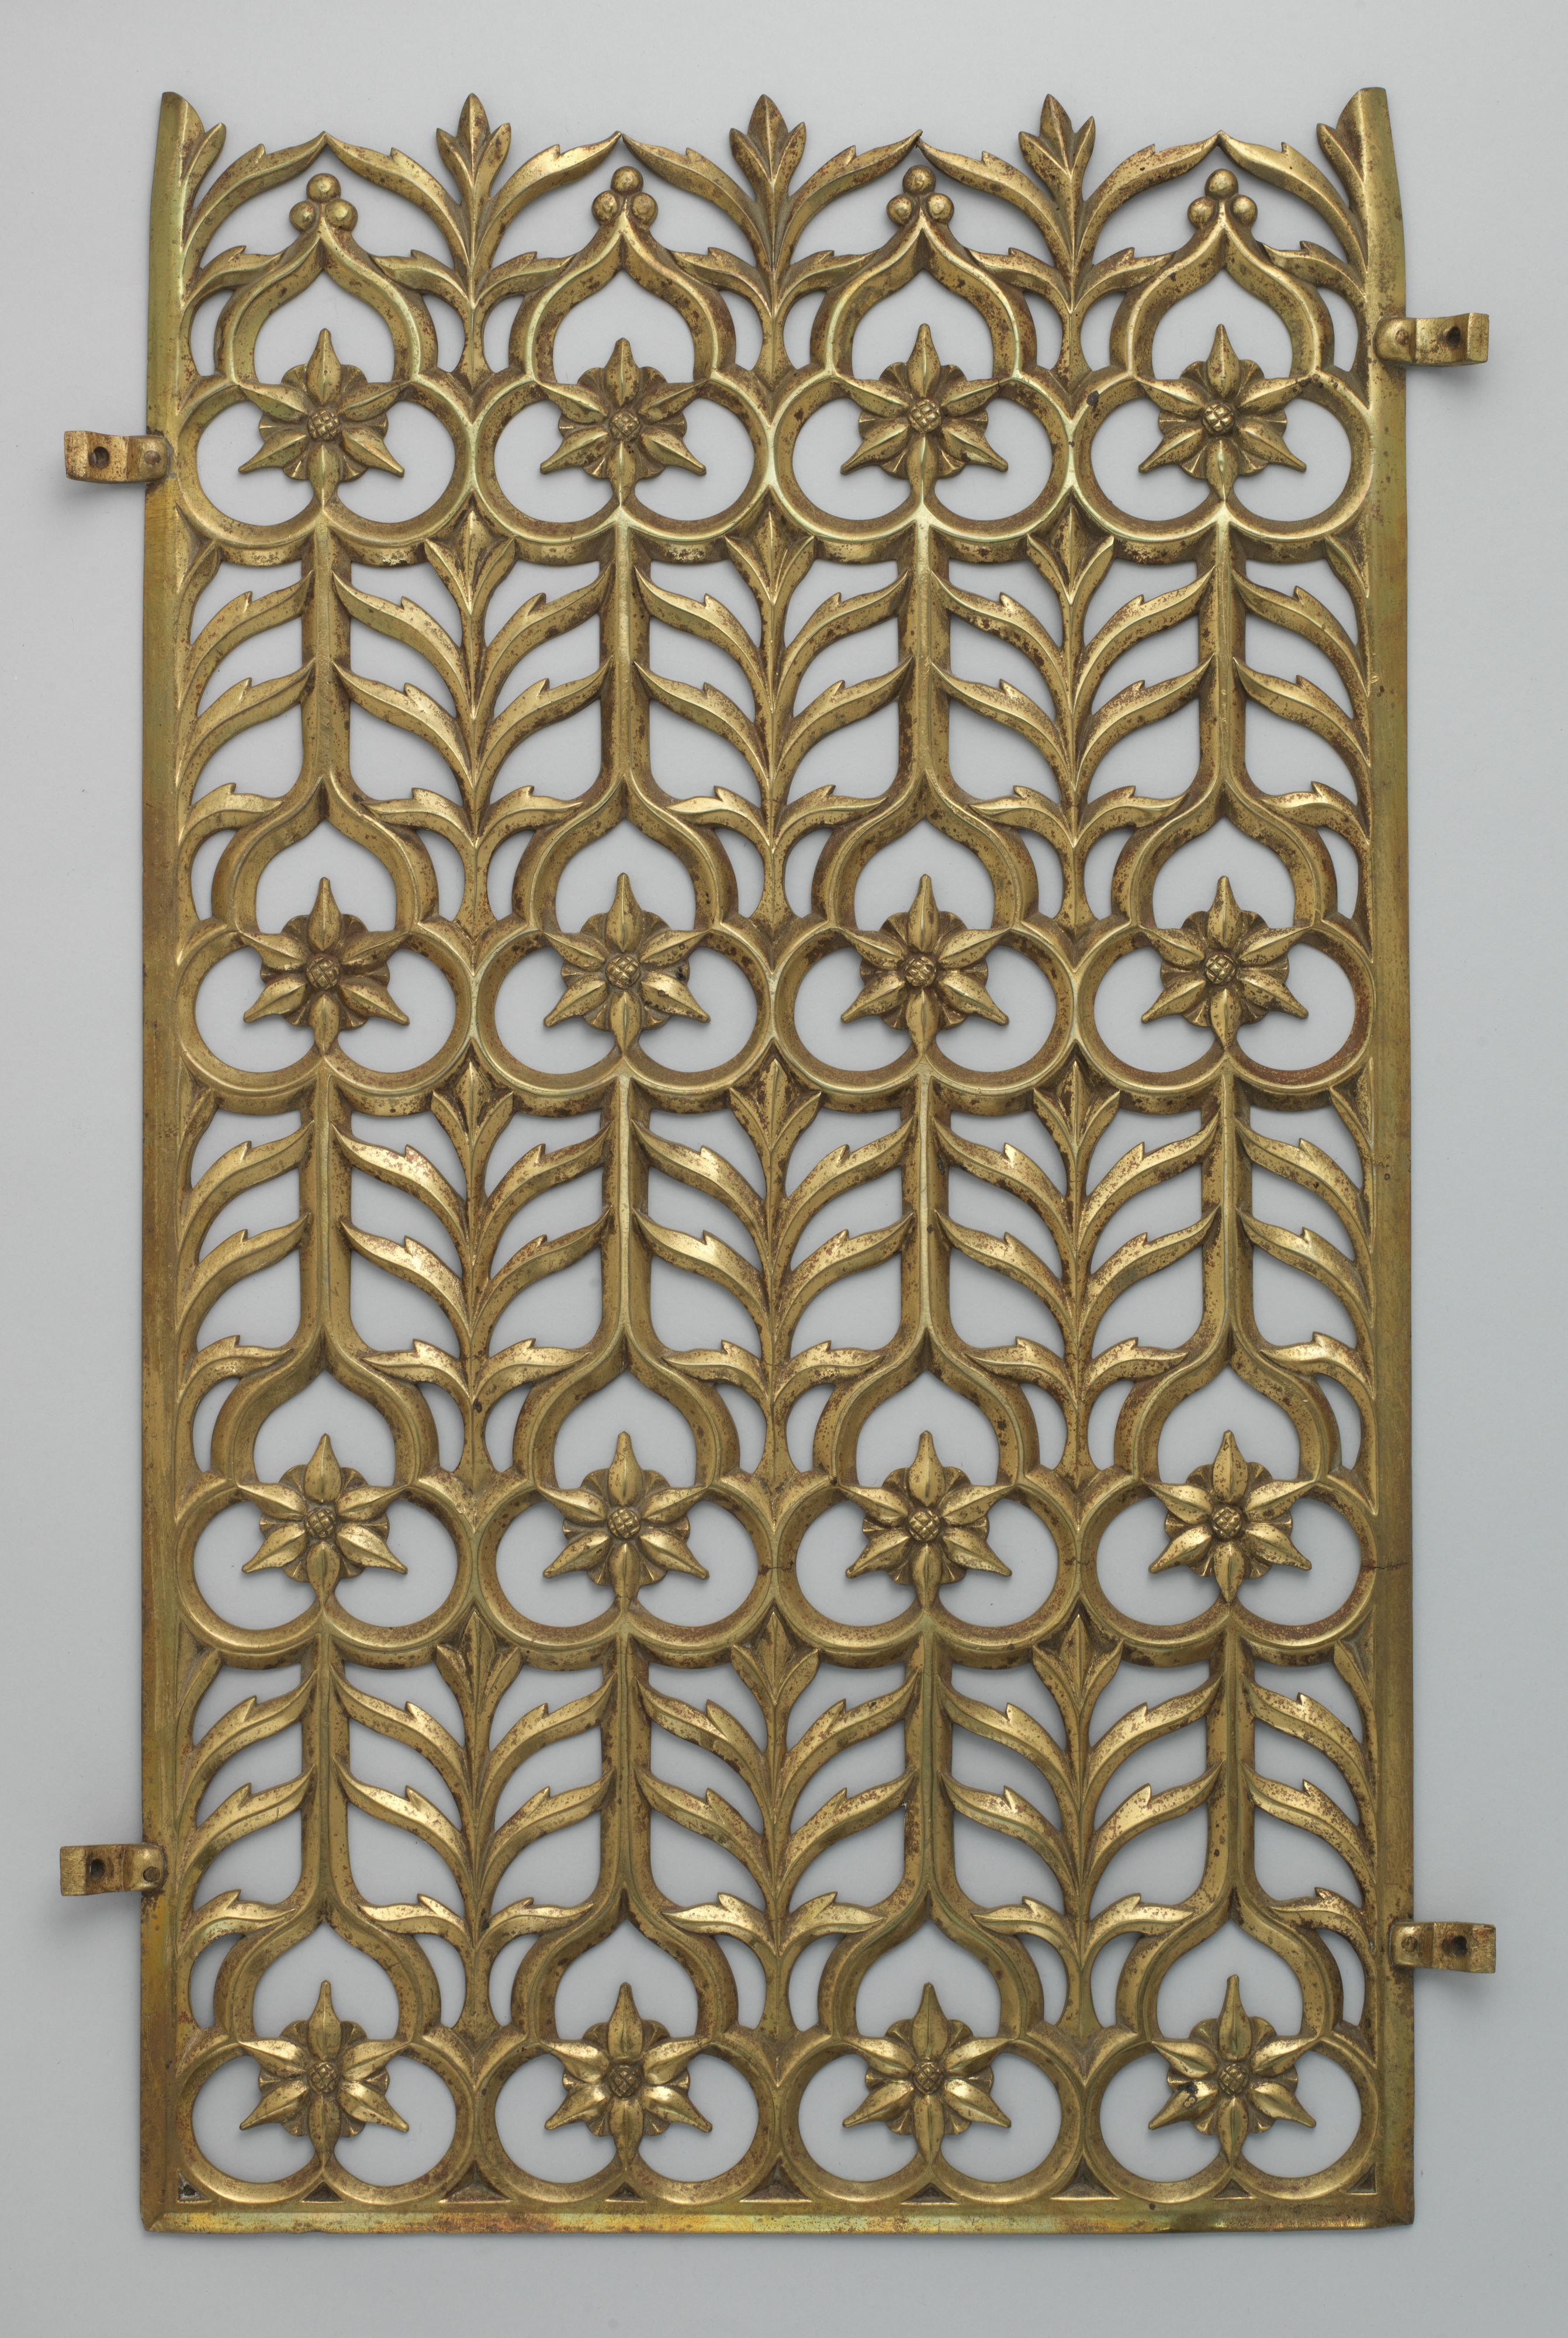 Augustus Welby Northmore Pugin, Decorative grill from the Palace of  Westminster, British, Birmingham